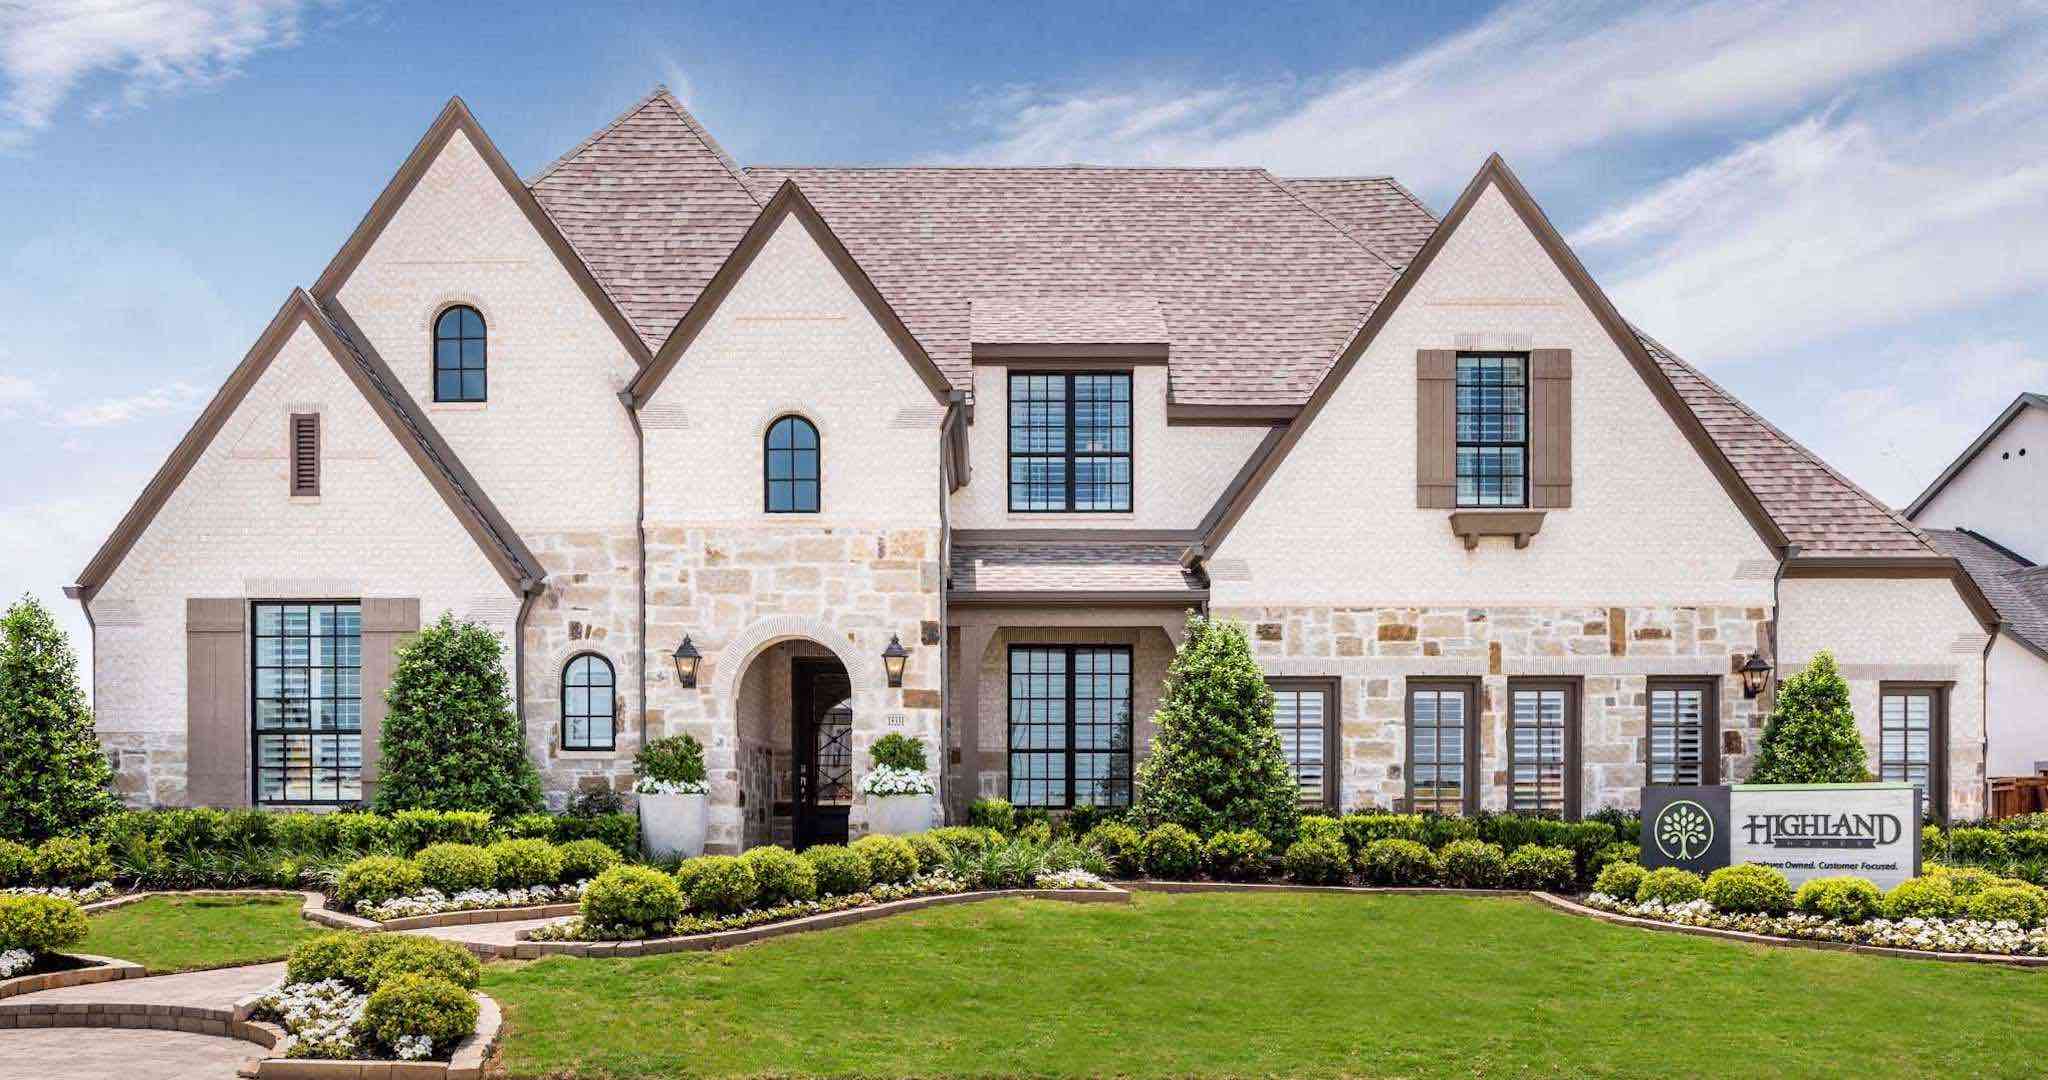 Highland Homes Model at The Grove in Frisco Texas